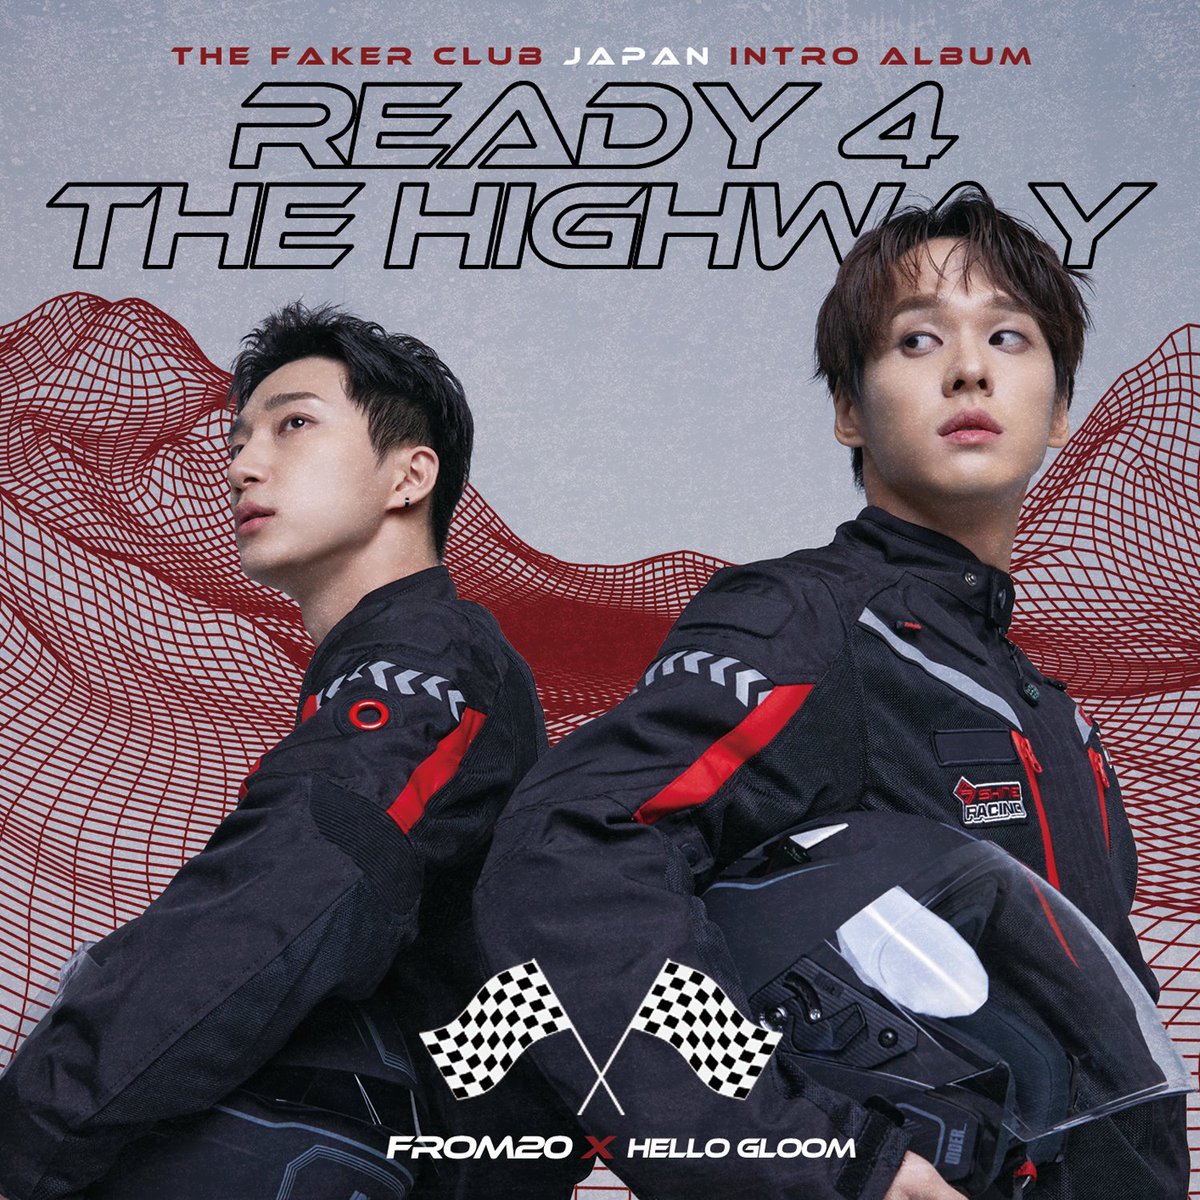 THE FAKER CLUB JAPAN INTRO ALBUM READY 4 THE HIGHWAY